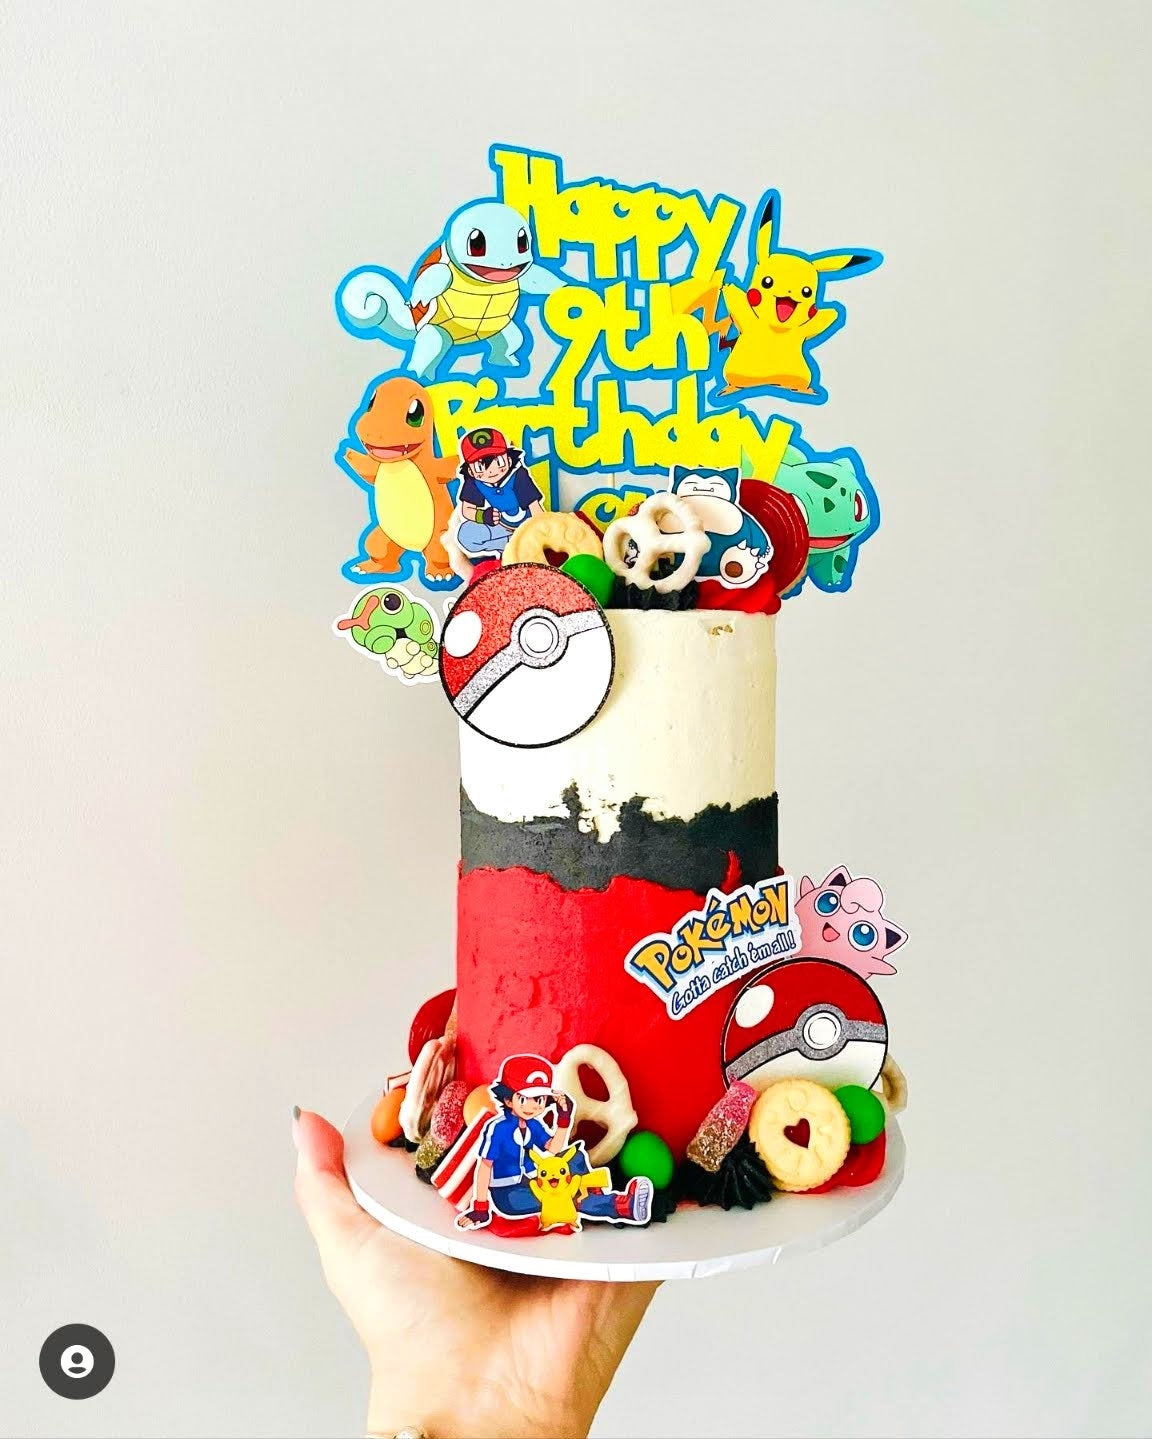 Pokemon Cake Topper Glitter Non Edible Free Delivery – CustomDesignsProject